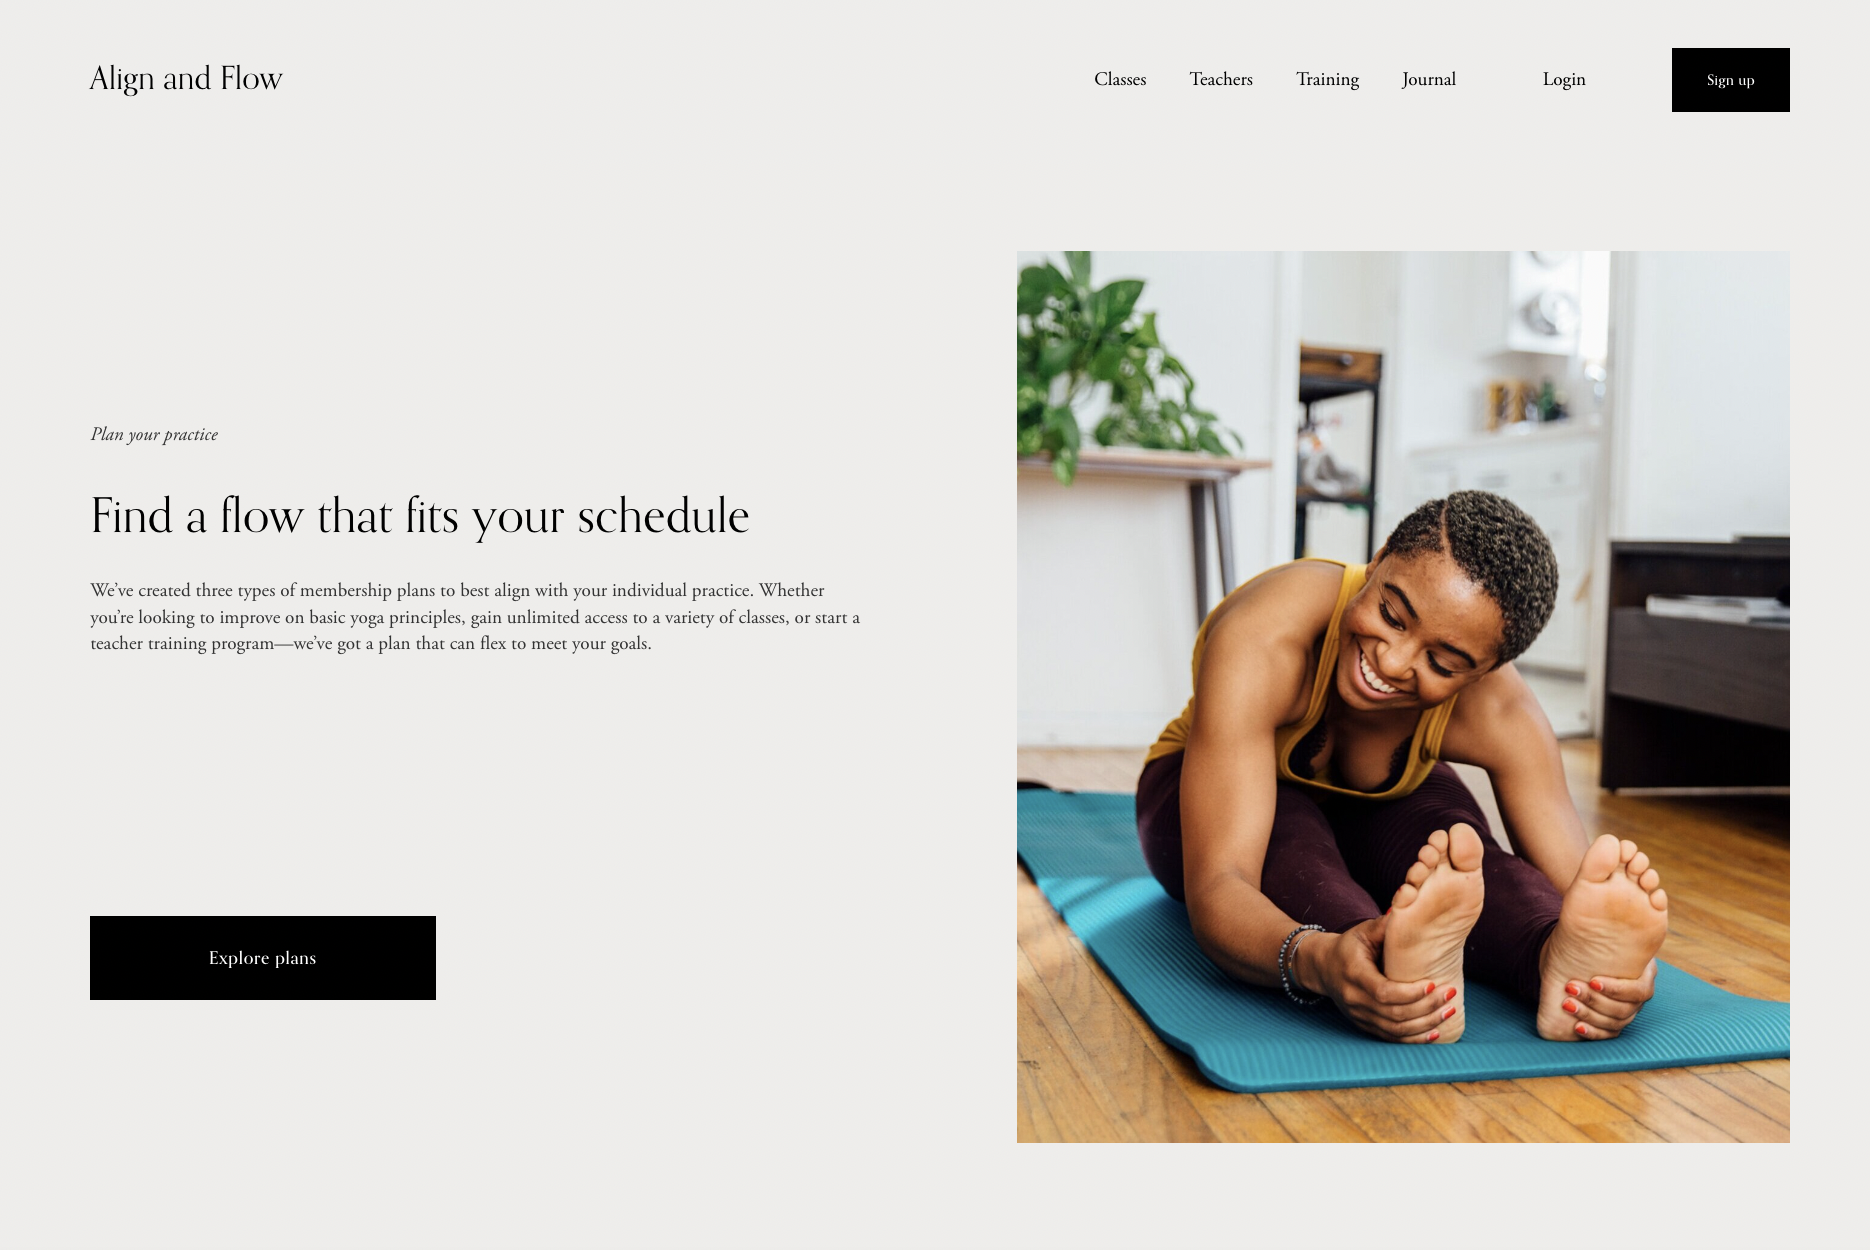 Teach Yoga Online - 5 Steps to Launch a Yoga Business in 48 Hours